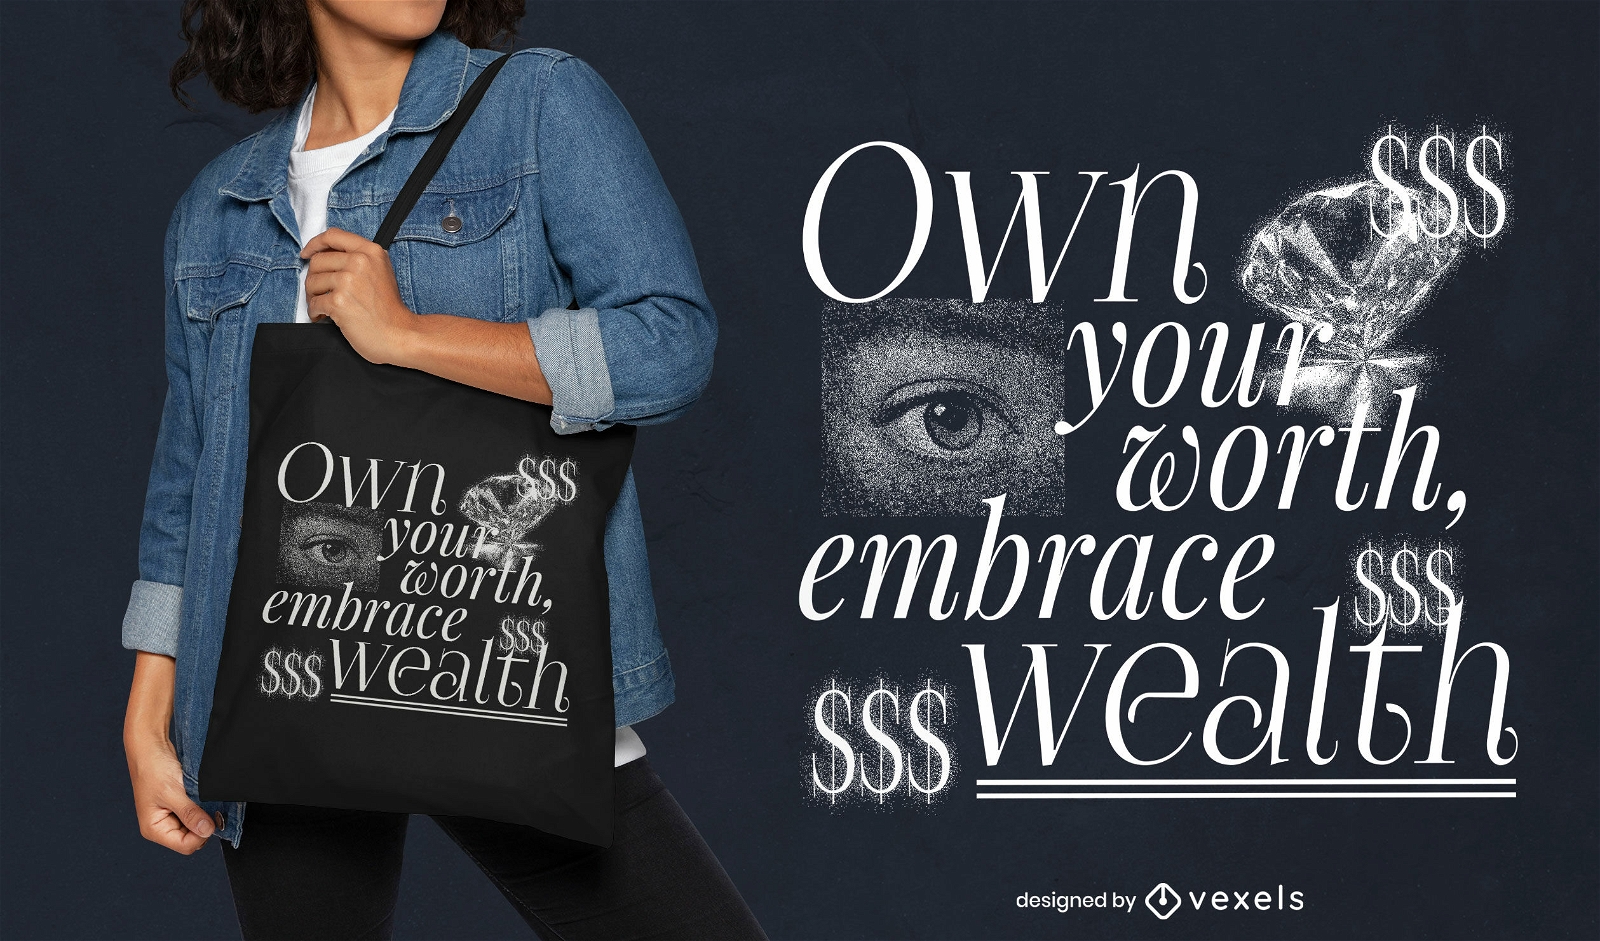 Own your wealth funny tote bag design